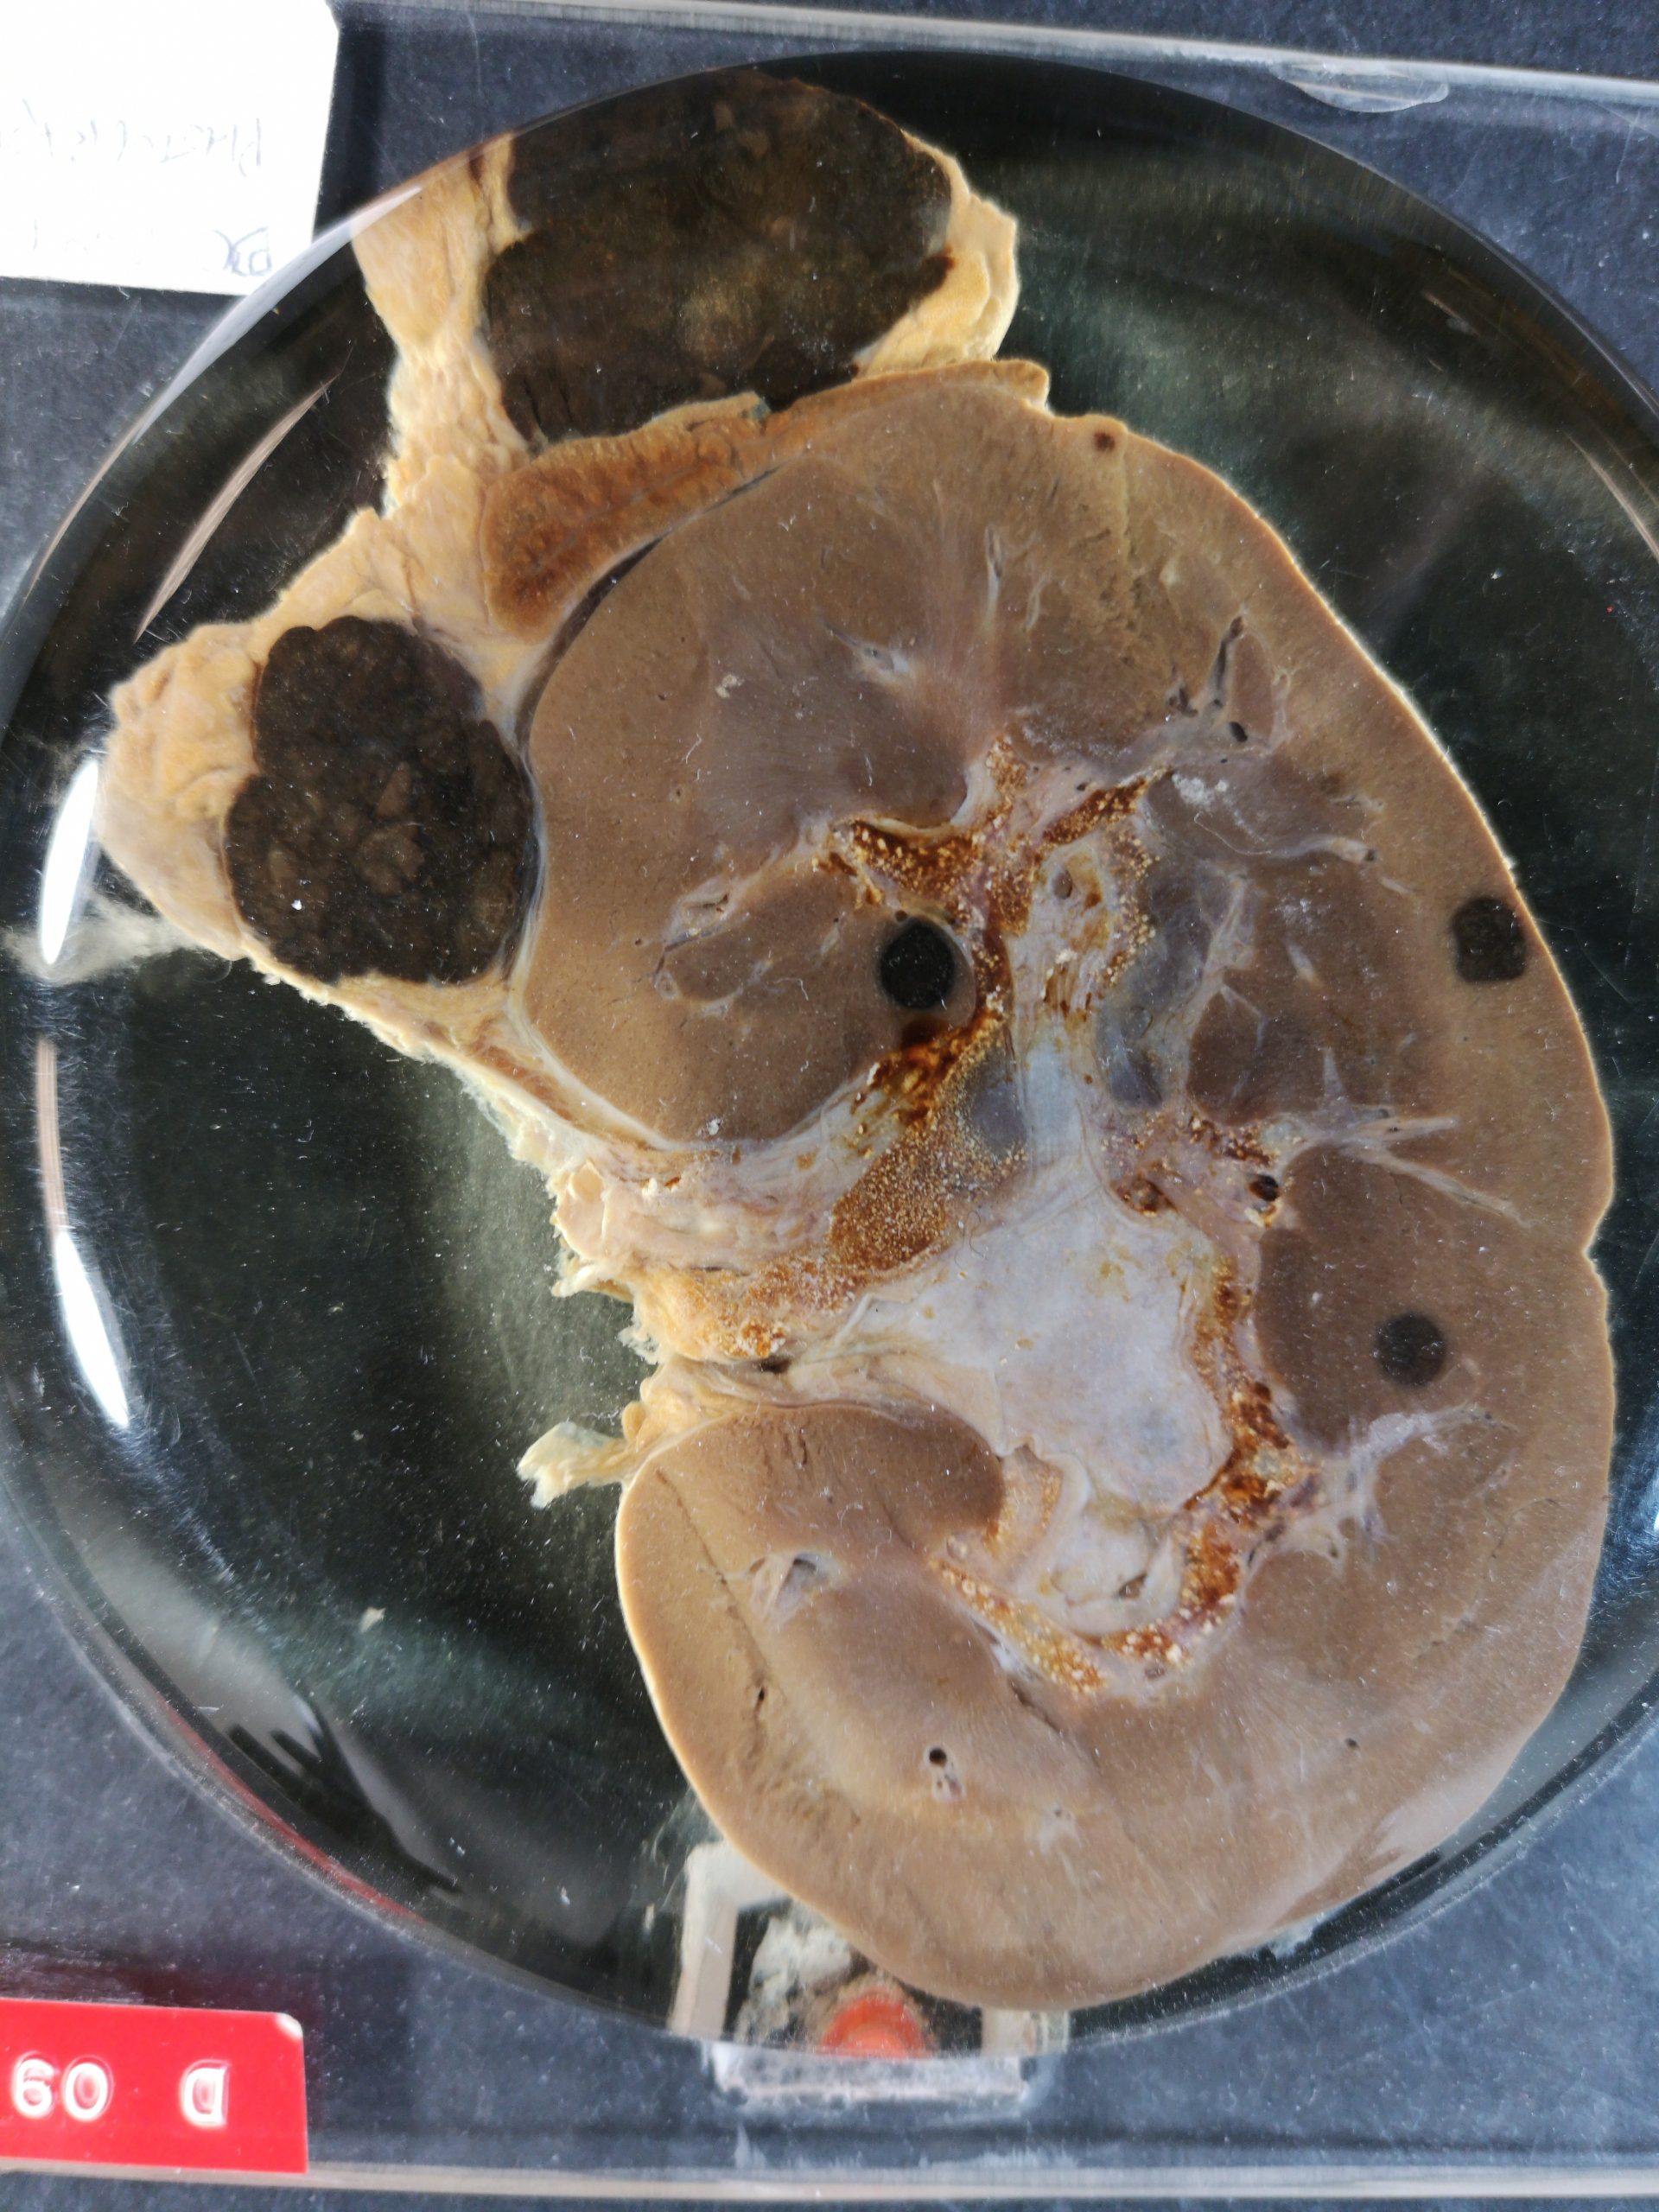 a kidney and adrenal are visible with large, obvious black spots within and on top of the kidney. These black spots are melanoma metastases